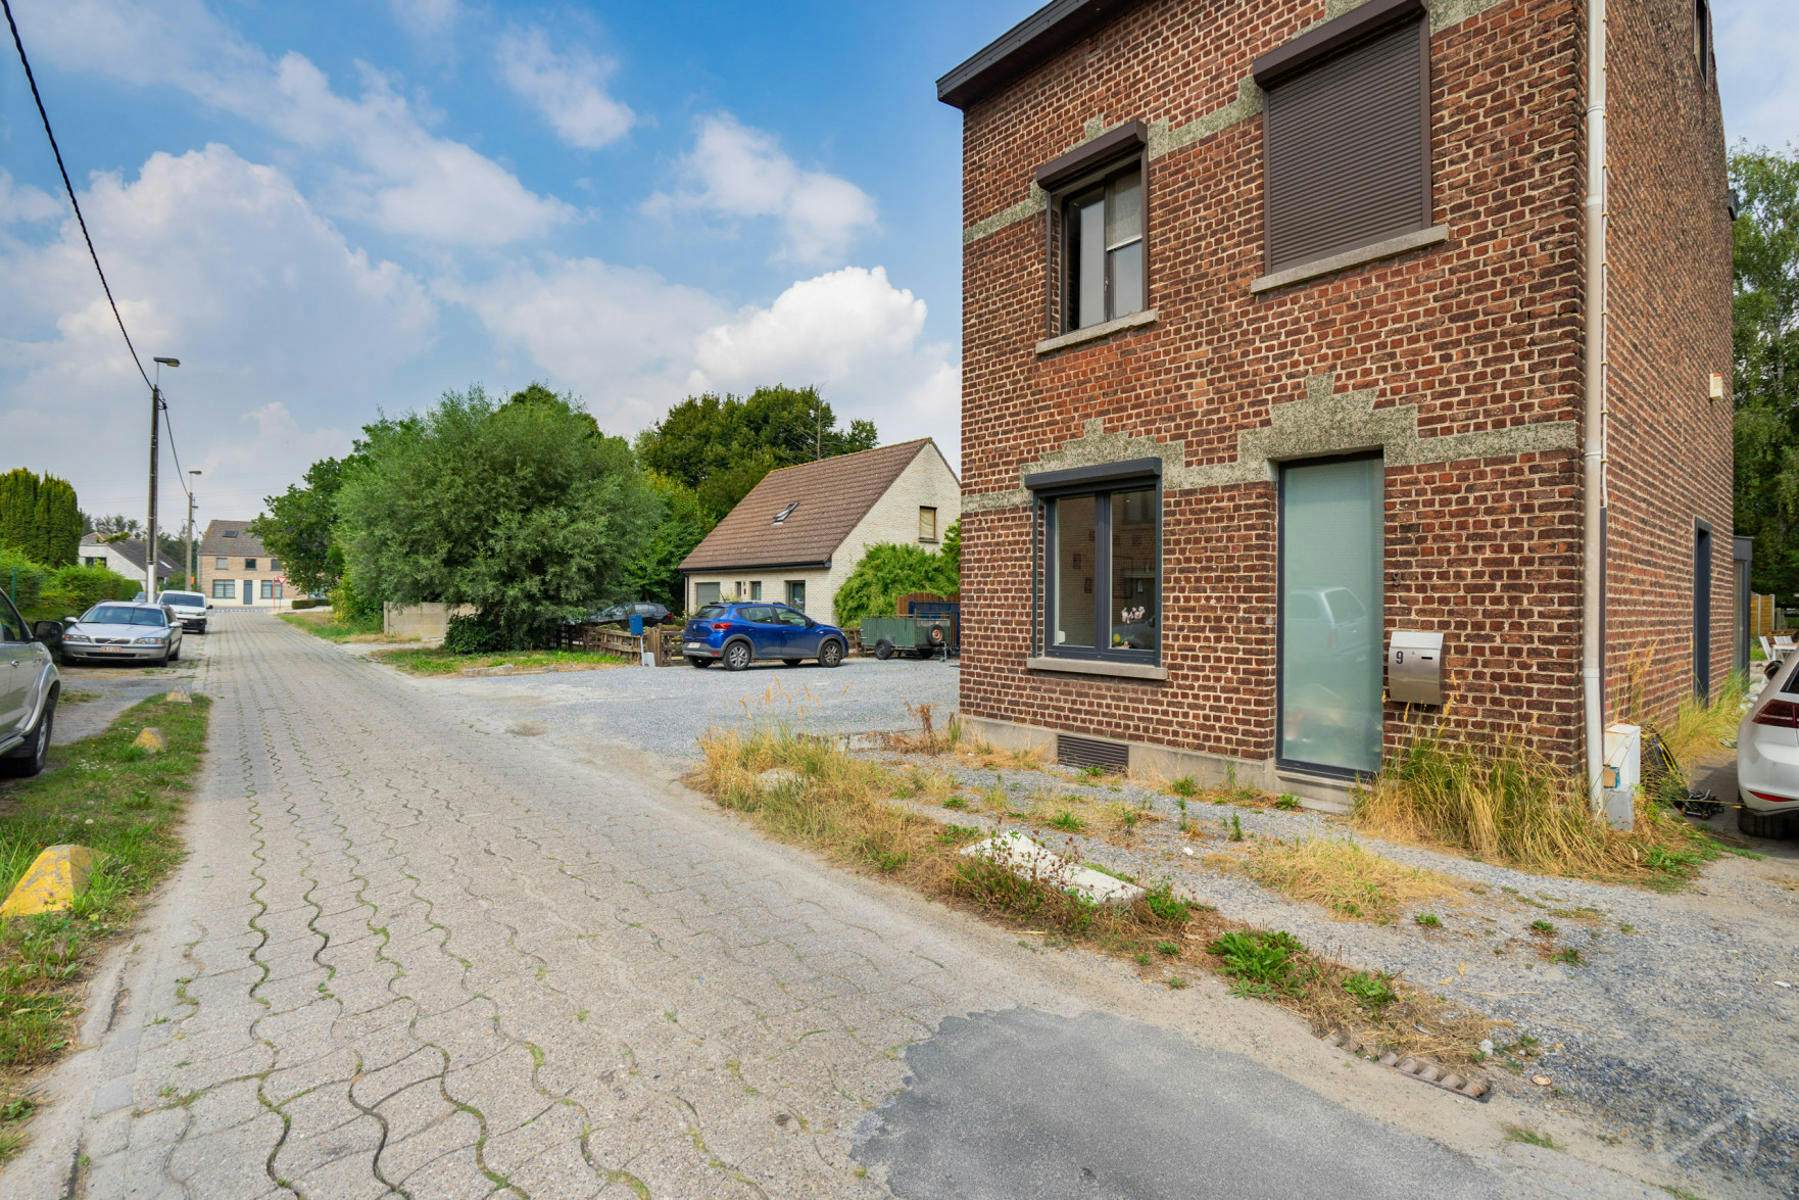 Picture 4 of 4 for House with three bedrooms in Vilvoorde